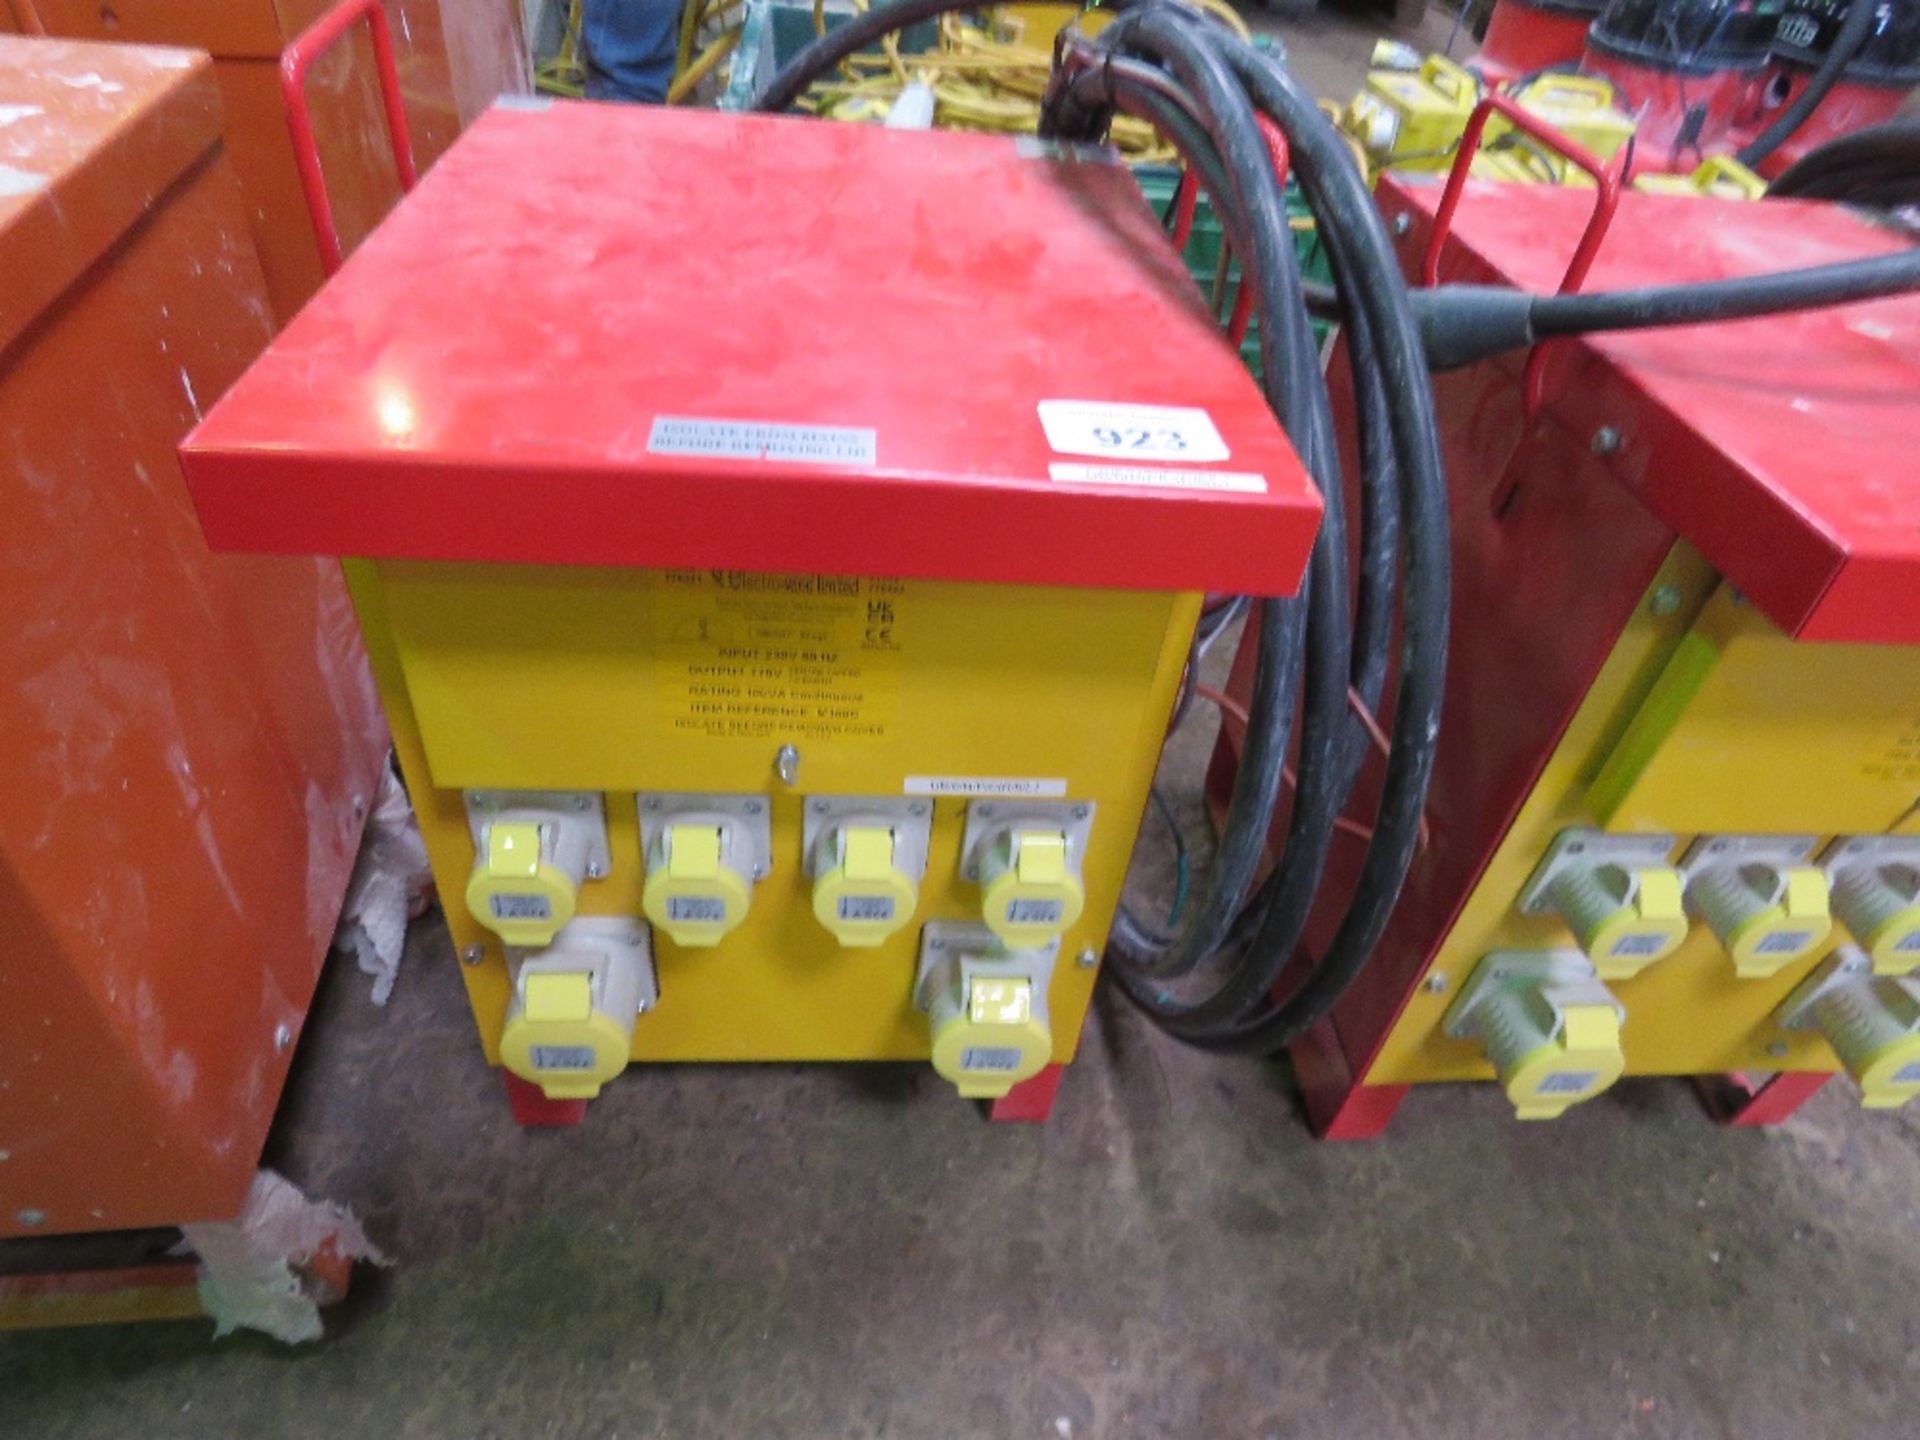 10KVA SITE TRANSFORMER, RED, 240VOLT INPUT, 110VOLT OUTPUT. SOURCED FROM COMPANY LIQUIDATION. THIS